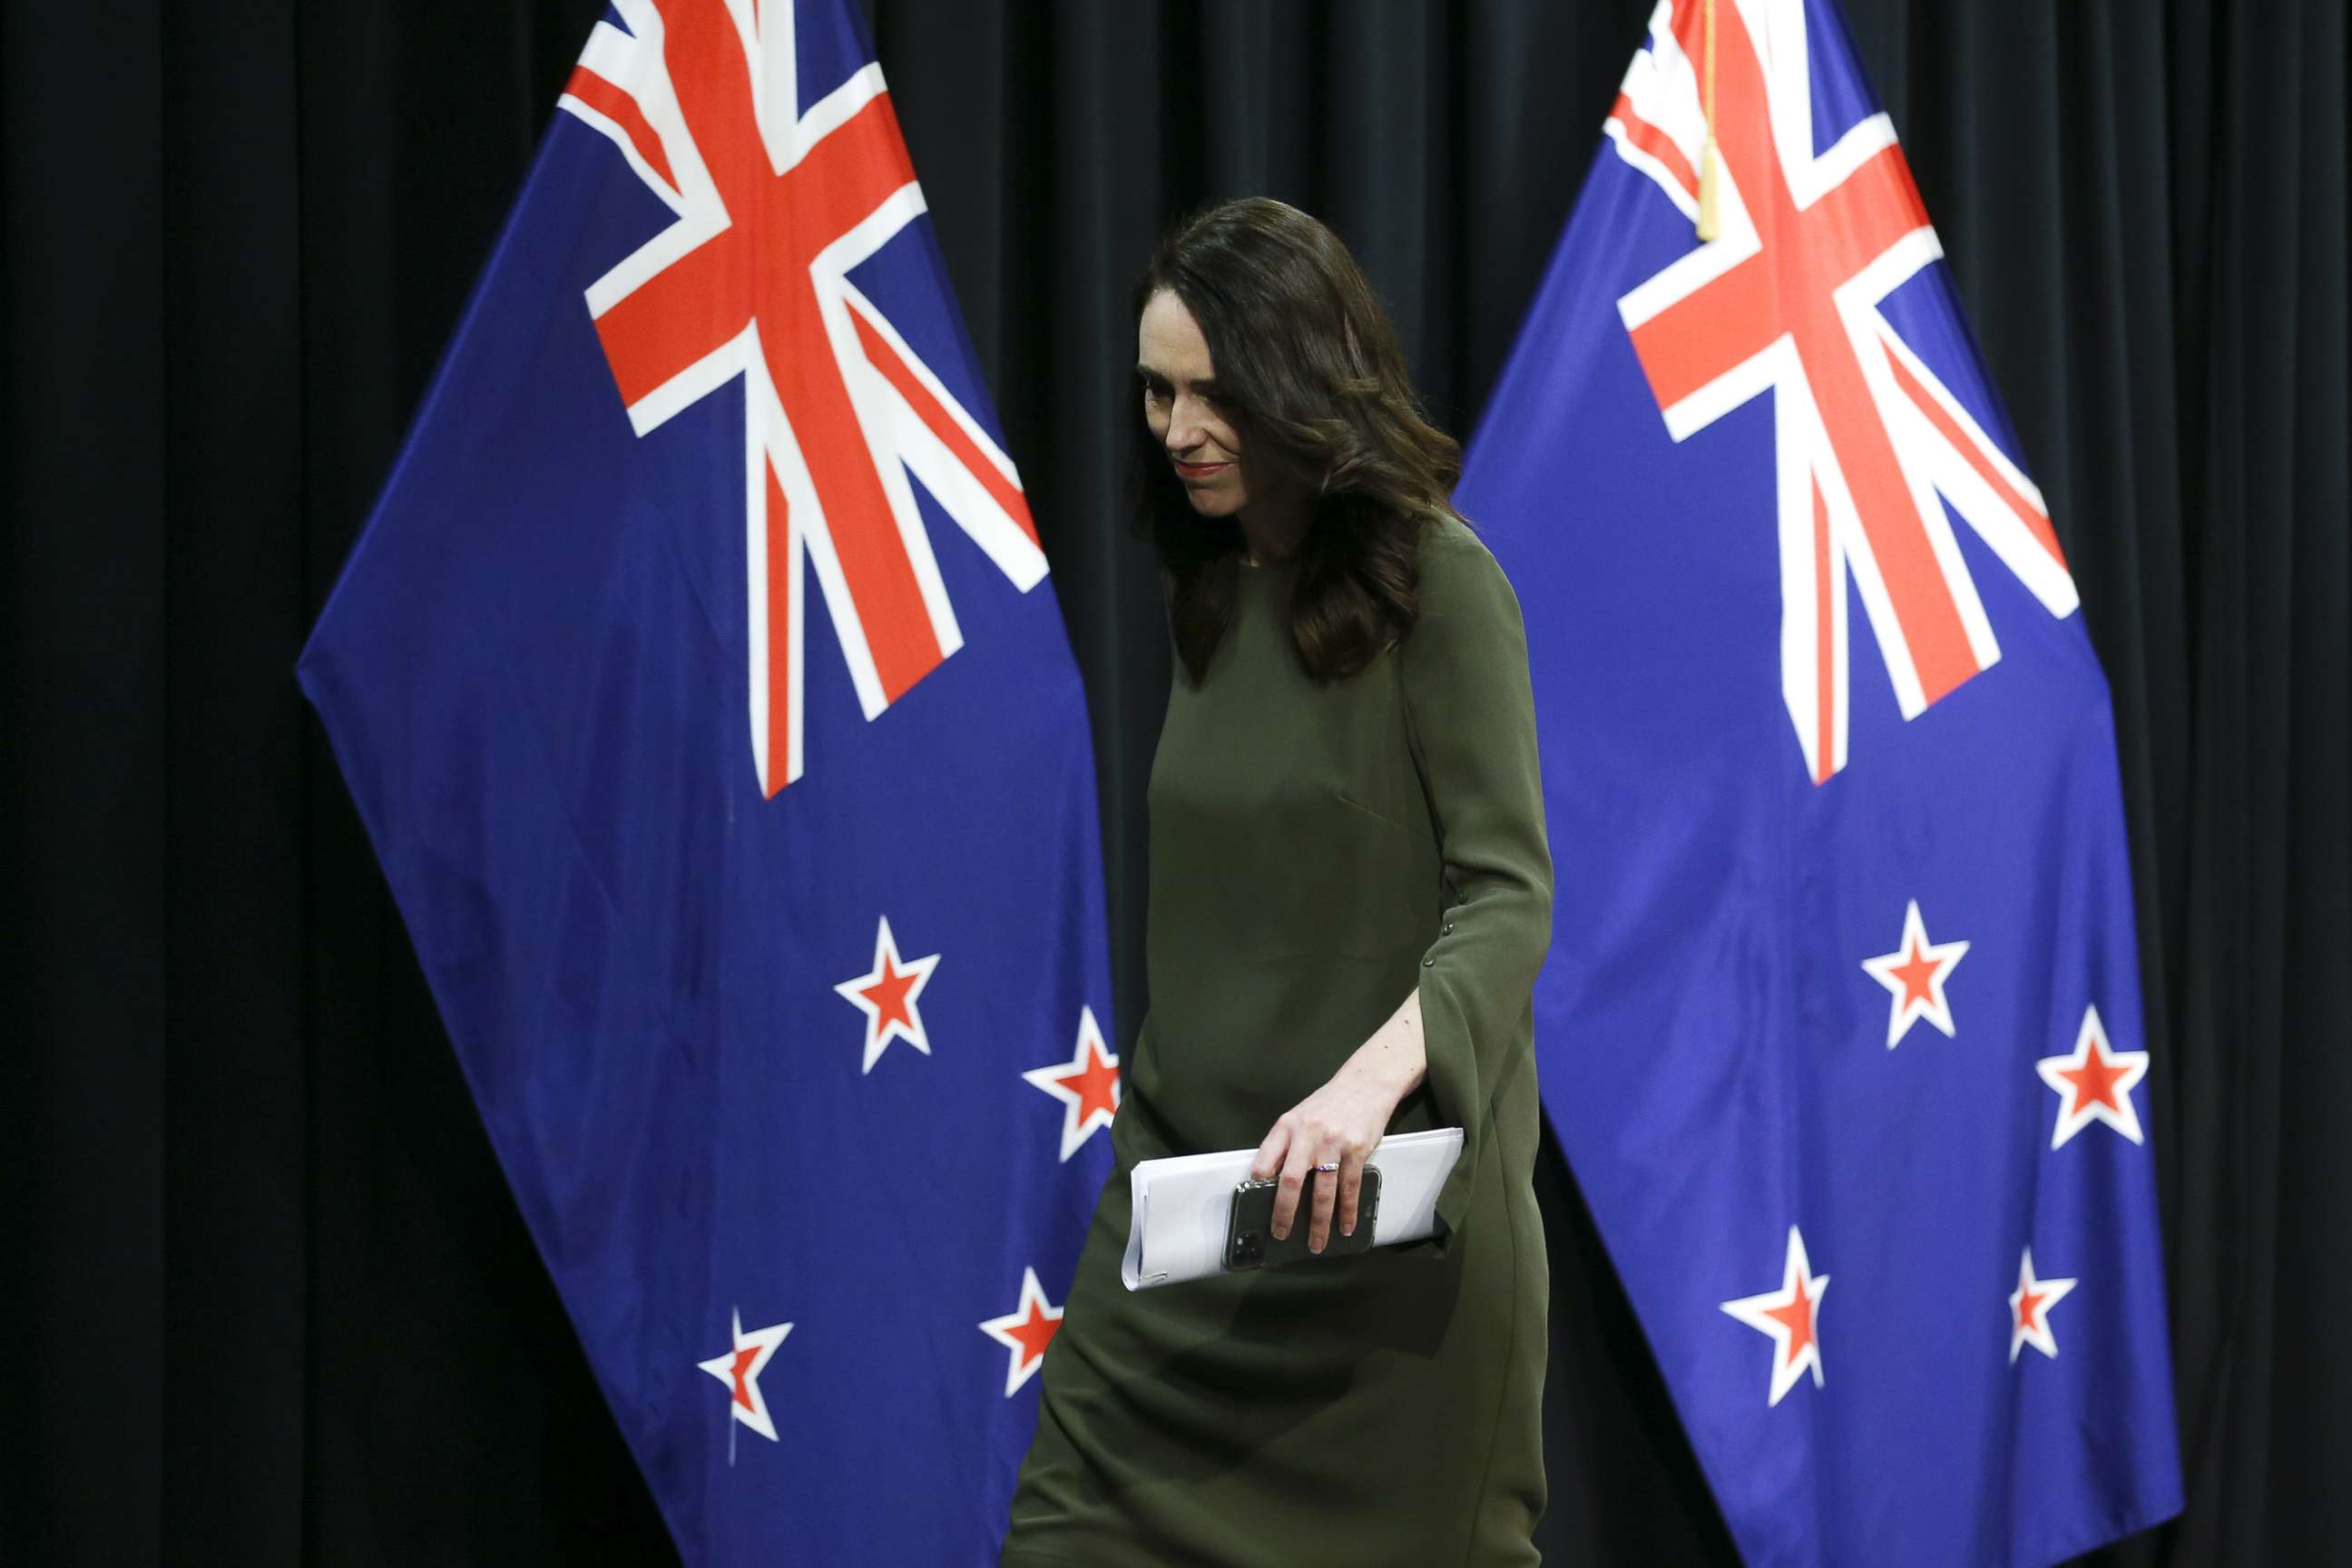 PHOTO: Prime Minister Jacinda Ardern announced that New Zealand's General Election will be delayed until 17 October due to disruptions caused by COVID-19 restrictions. 